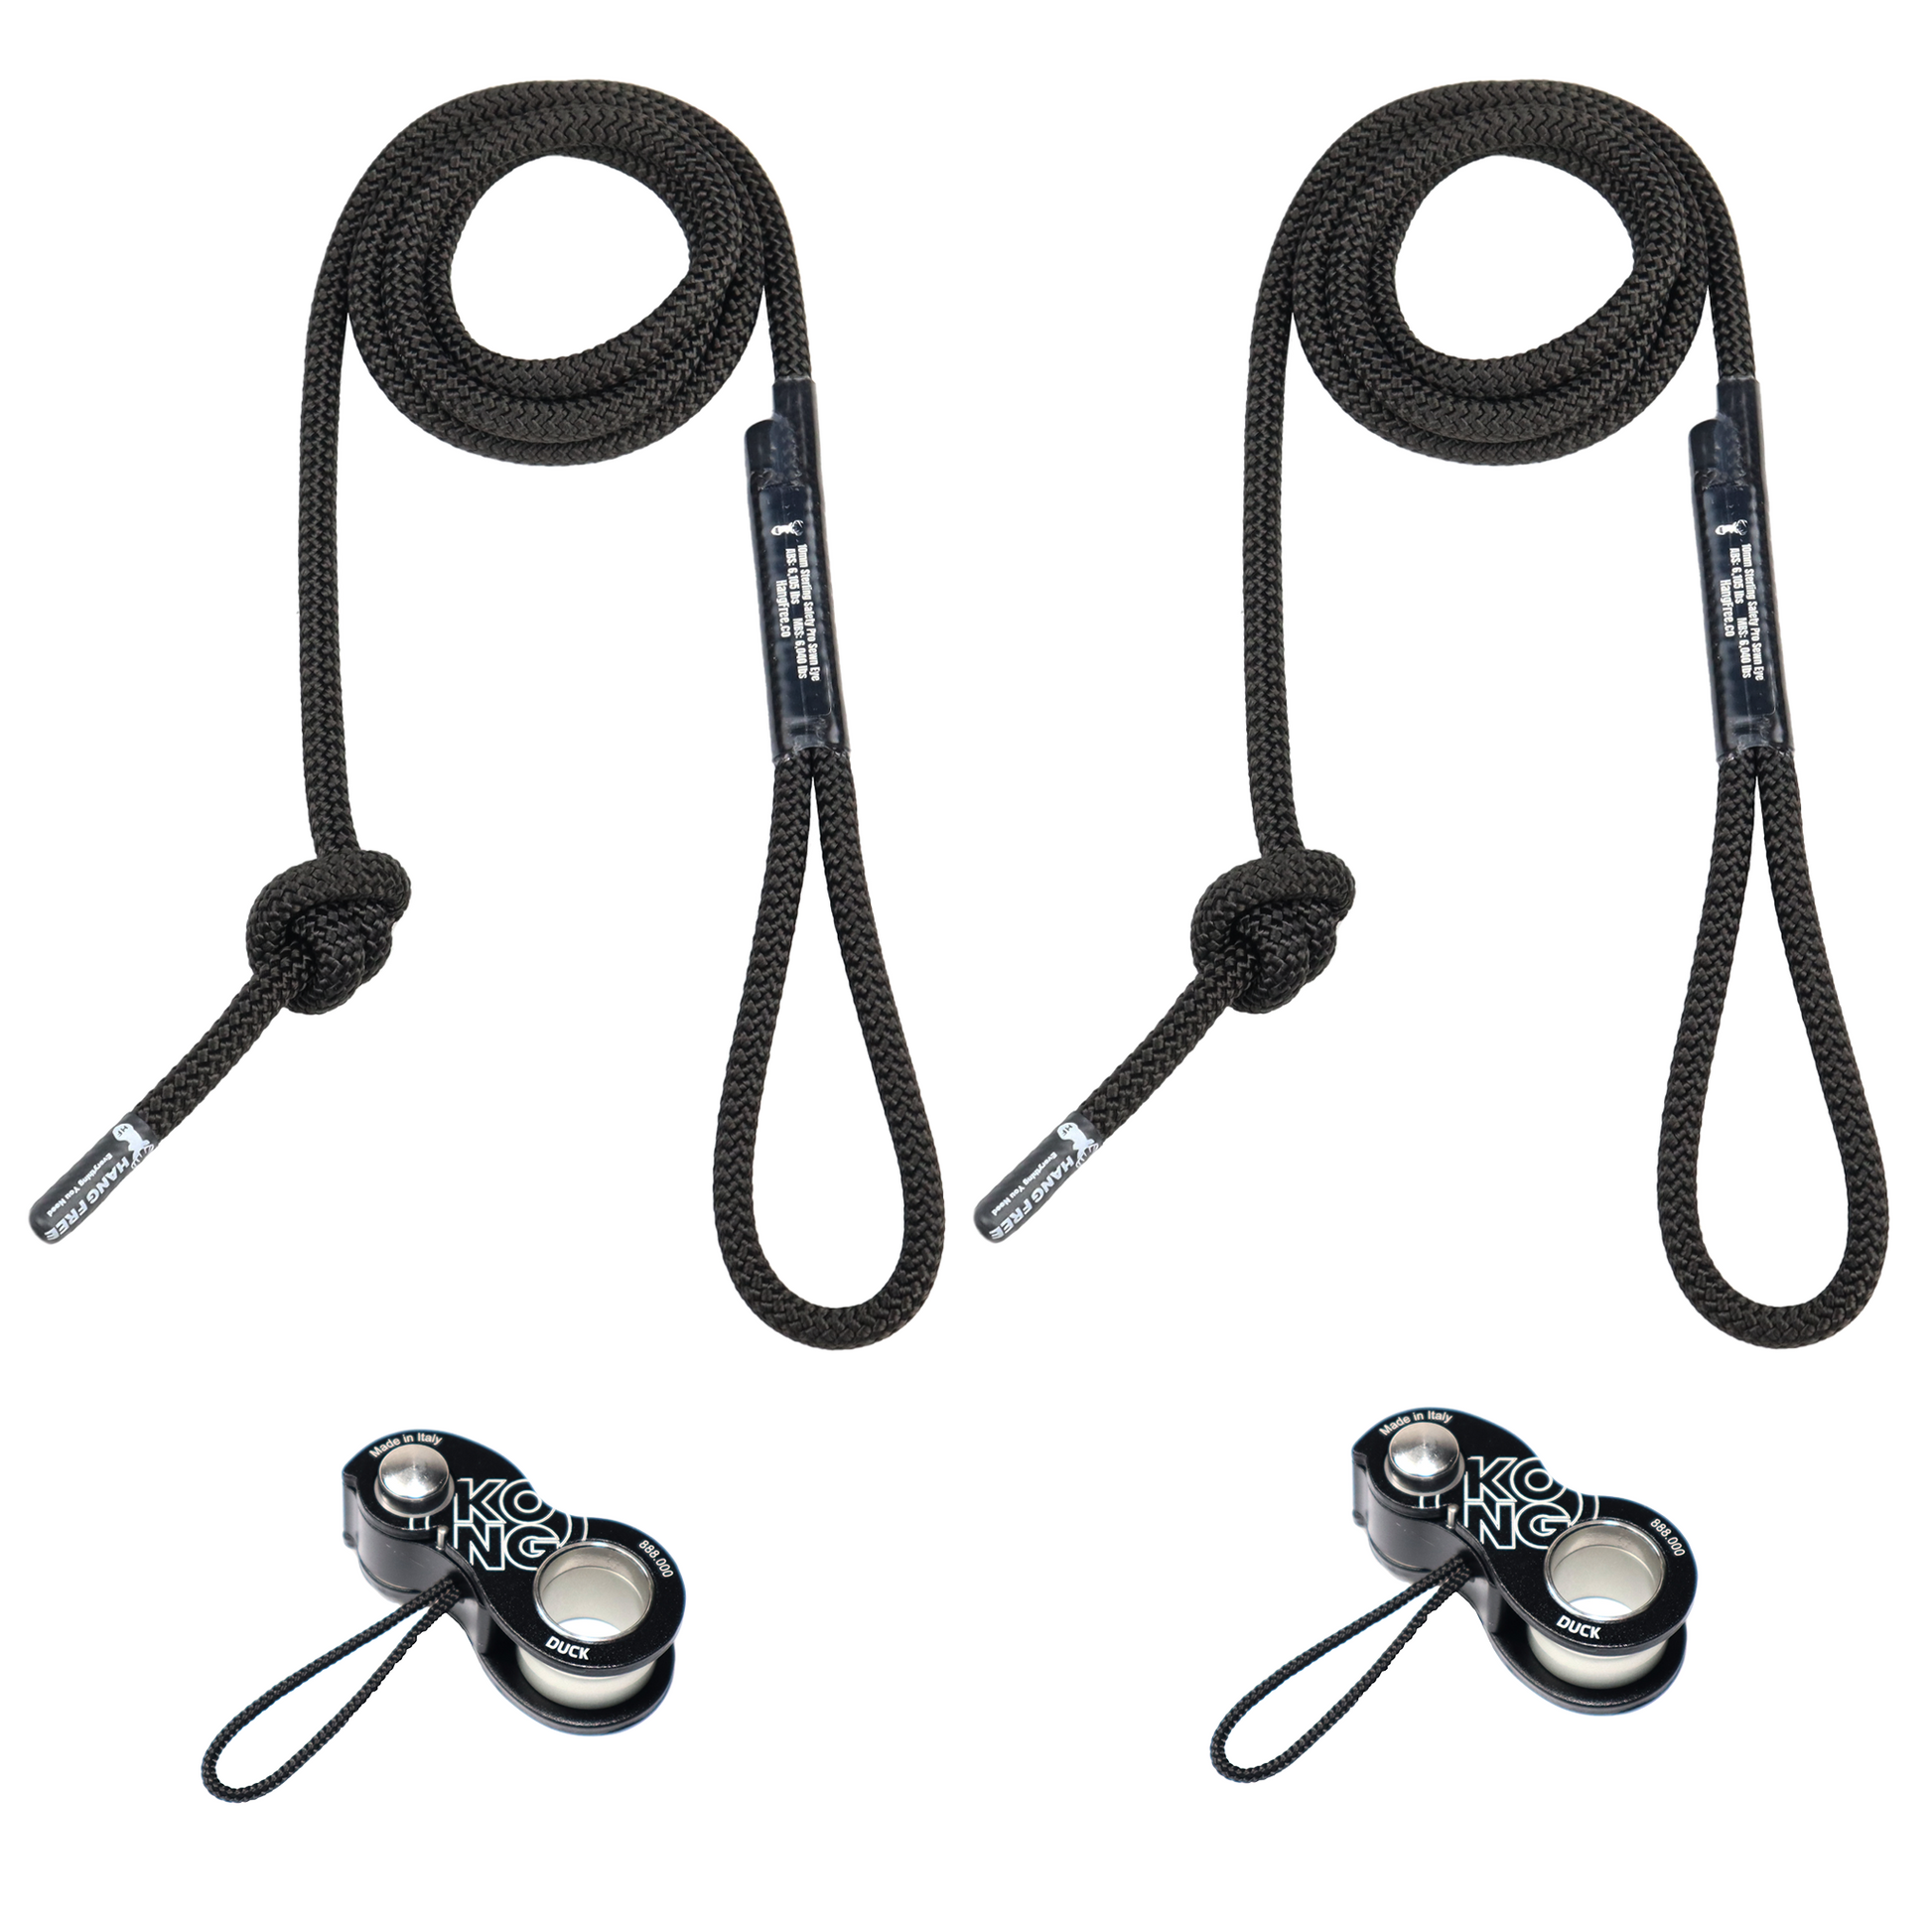 10mm BlackOut Deluxe Tether & Lineman's Package